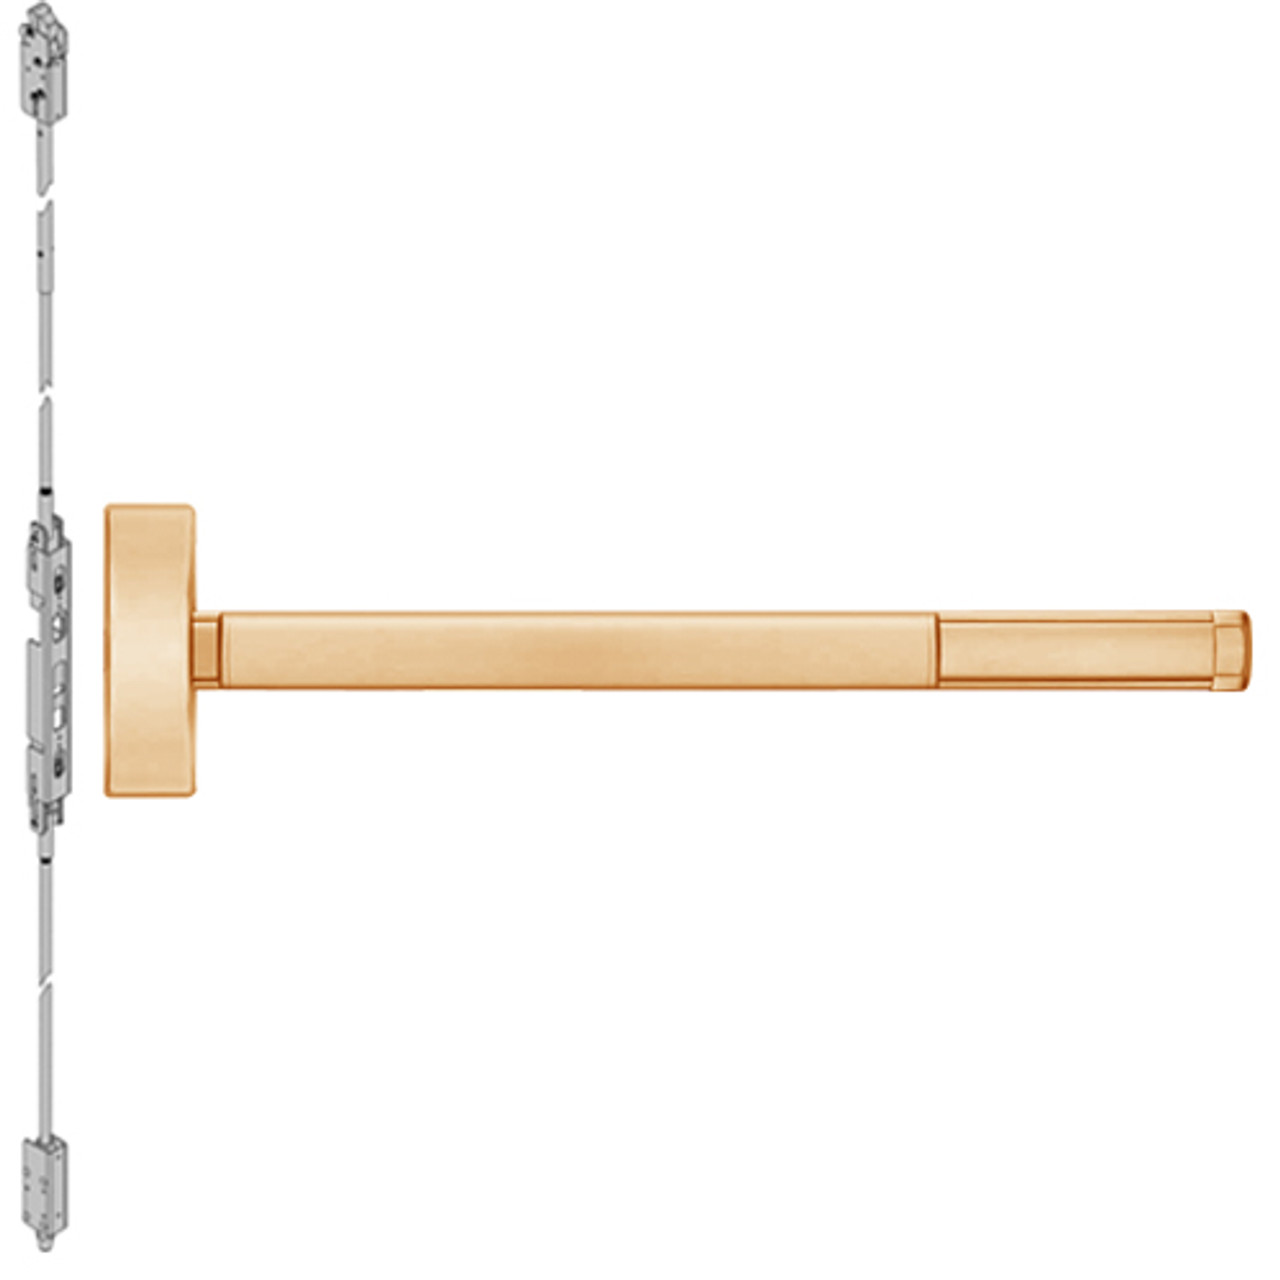 DE2803-612-36 PHI 2800 Series Concealed Vertical Rod Exit Device with Delayed Egress Prepped for Key Retracts Latchbolt in Satin Bronze Finish